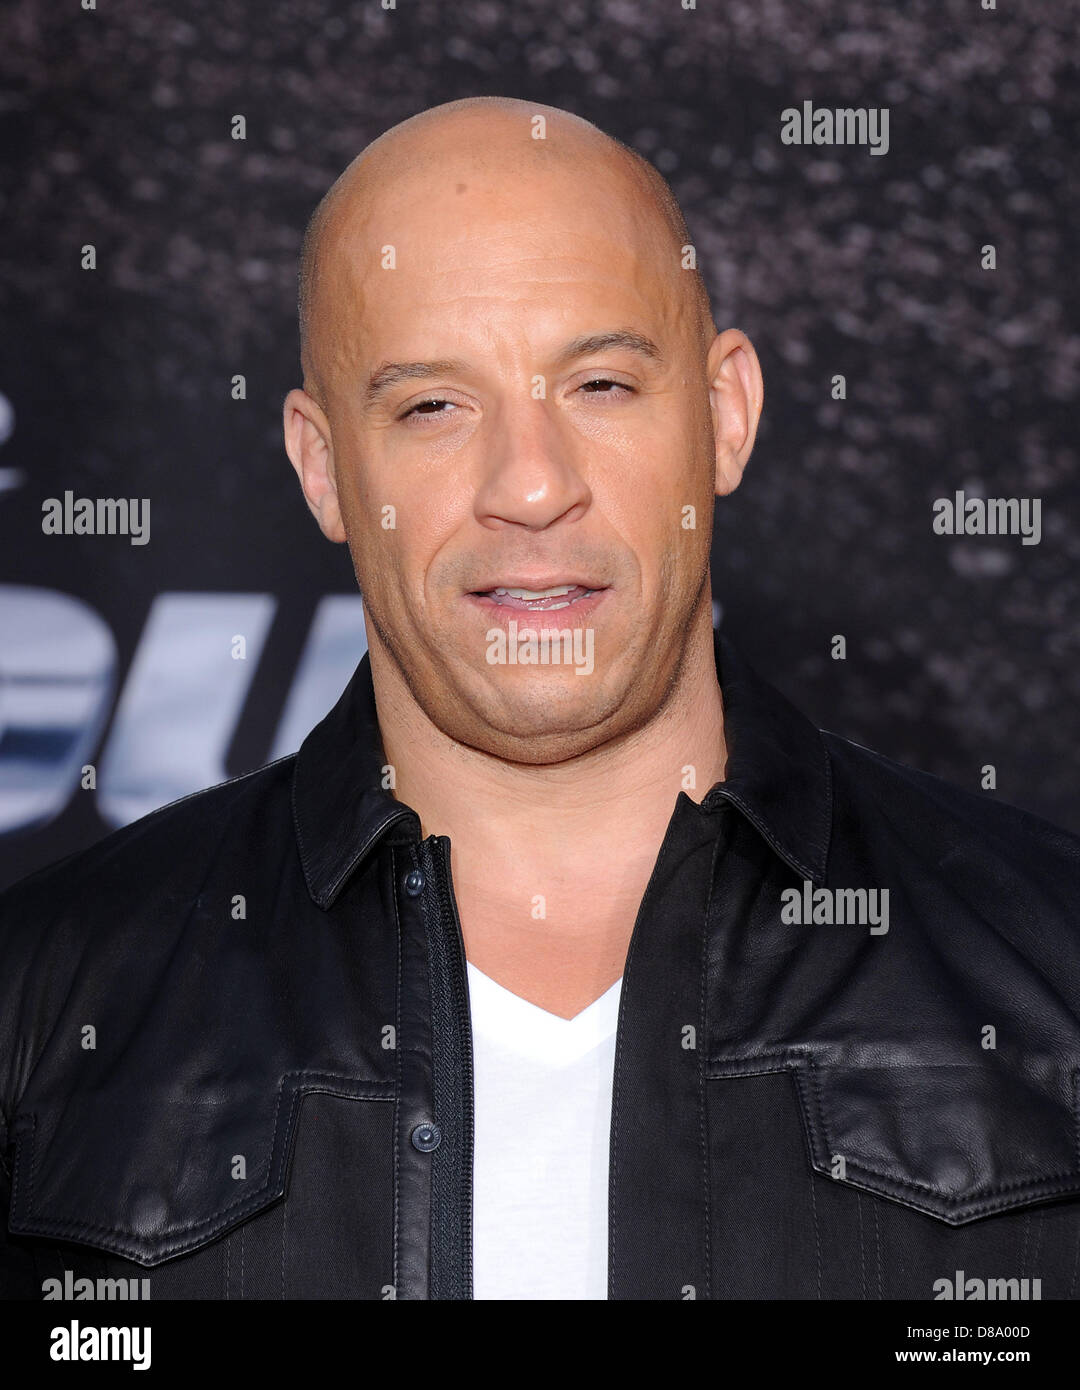 Los Angeles, California, USA. 21st May 2013. Vin Diesel arrives for the premiere of the film 'Fast & Furious 6' at the Gibson Ampitheater. (Credit Image: Credit:  Lisa O'Connor/ZUMAPRESS.com/Alamy Live News) Stock Photo